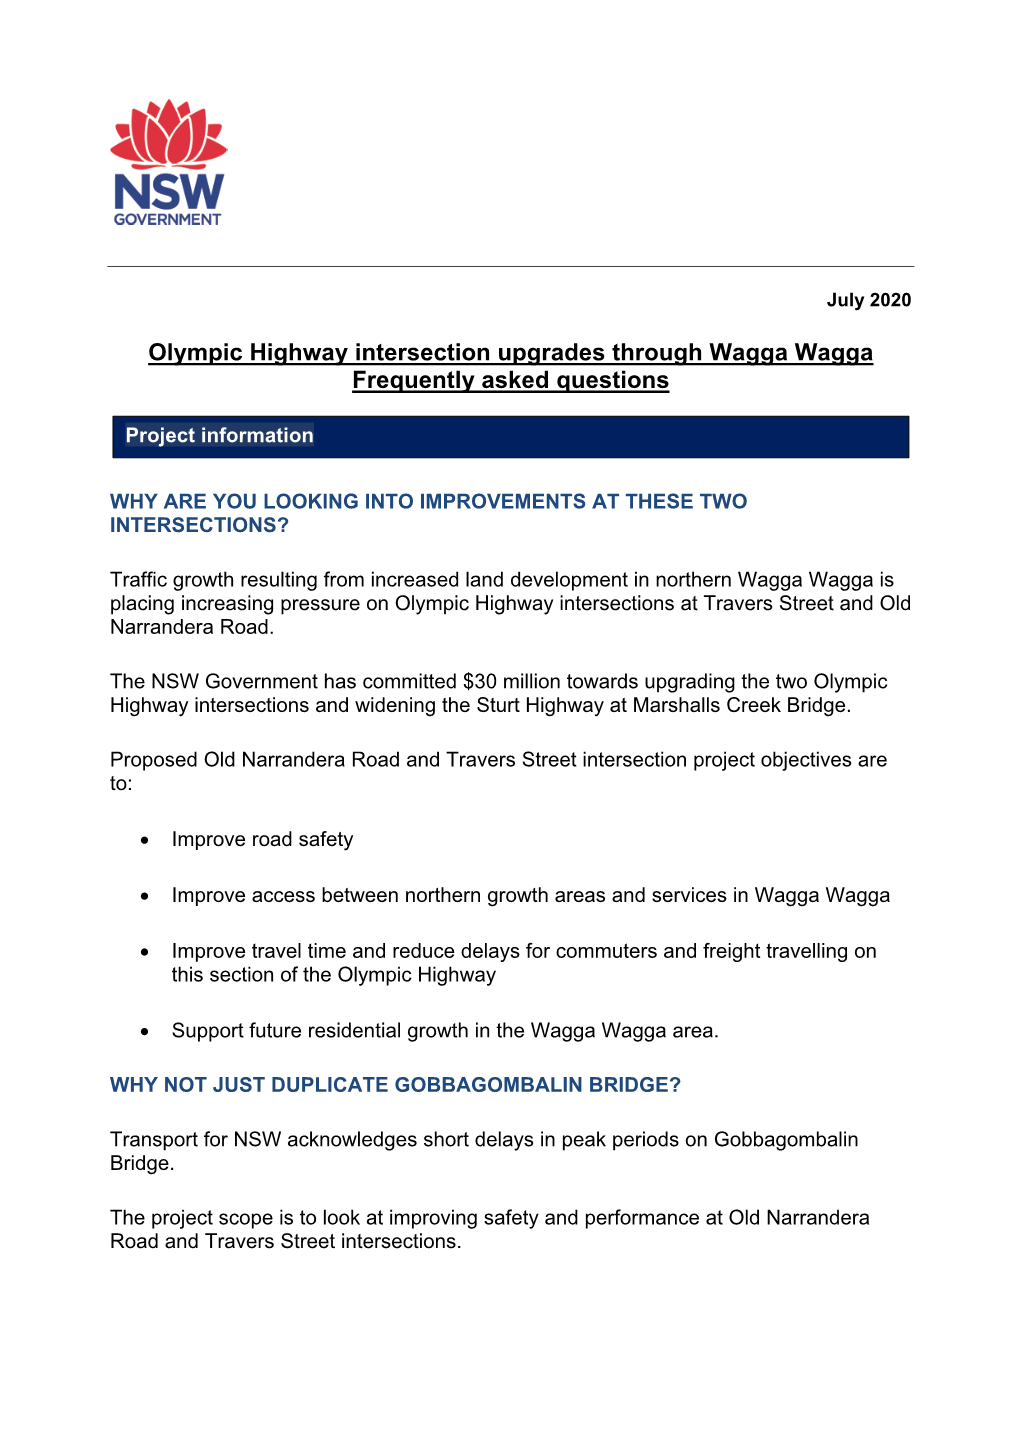 Olympic Highway Intersection Upgrades Through Wagga Wagga Frequently Asked Questions